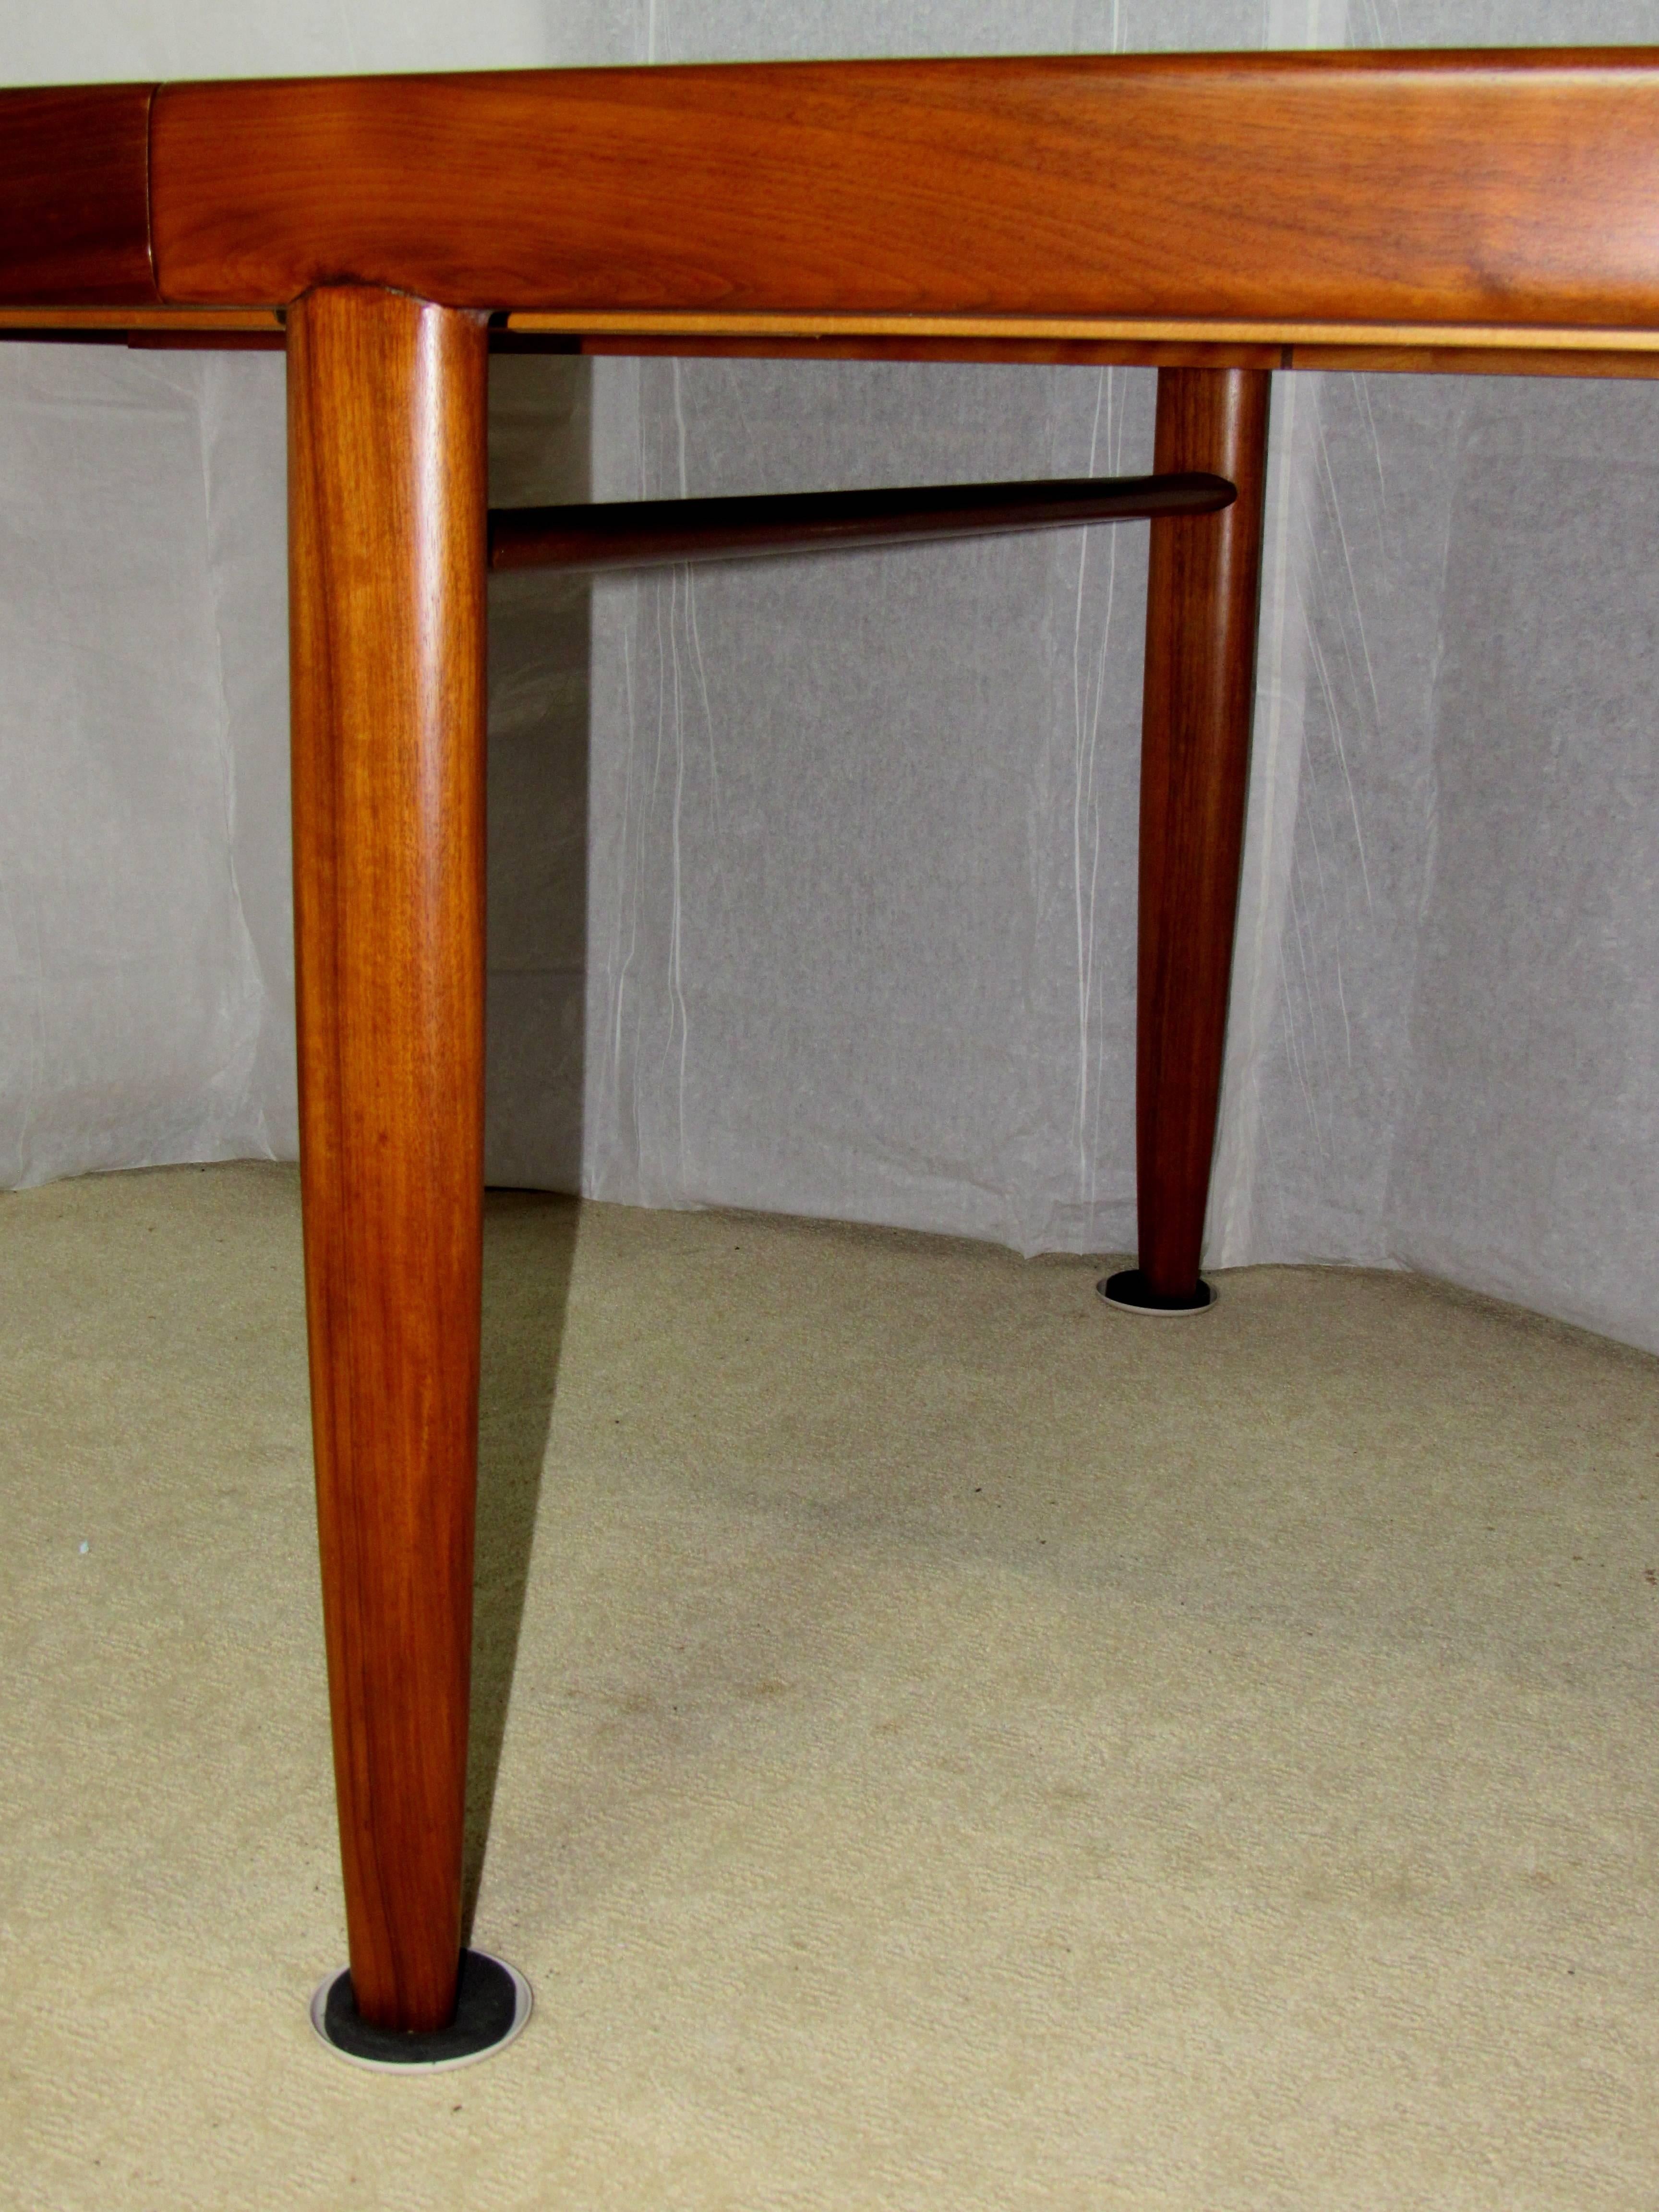 20th Century Refractory Dining Table by George Nakashima for Widdicomb 1960